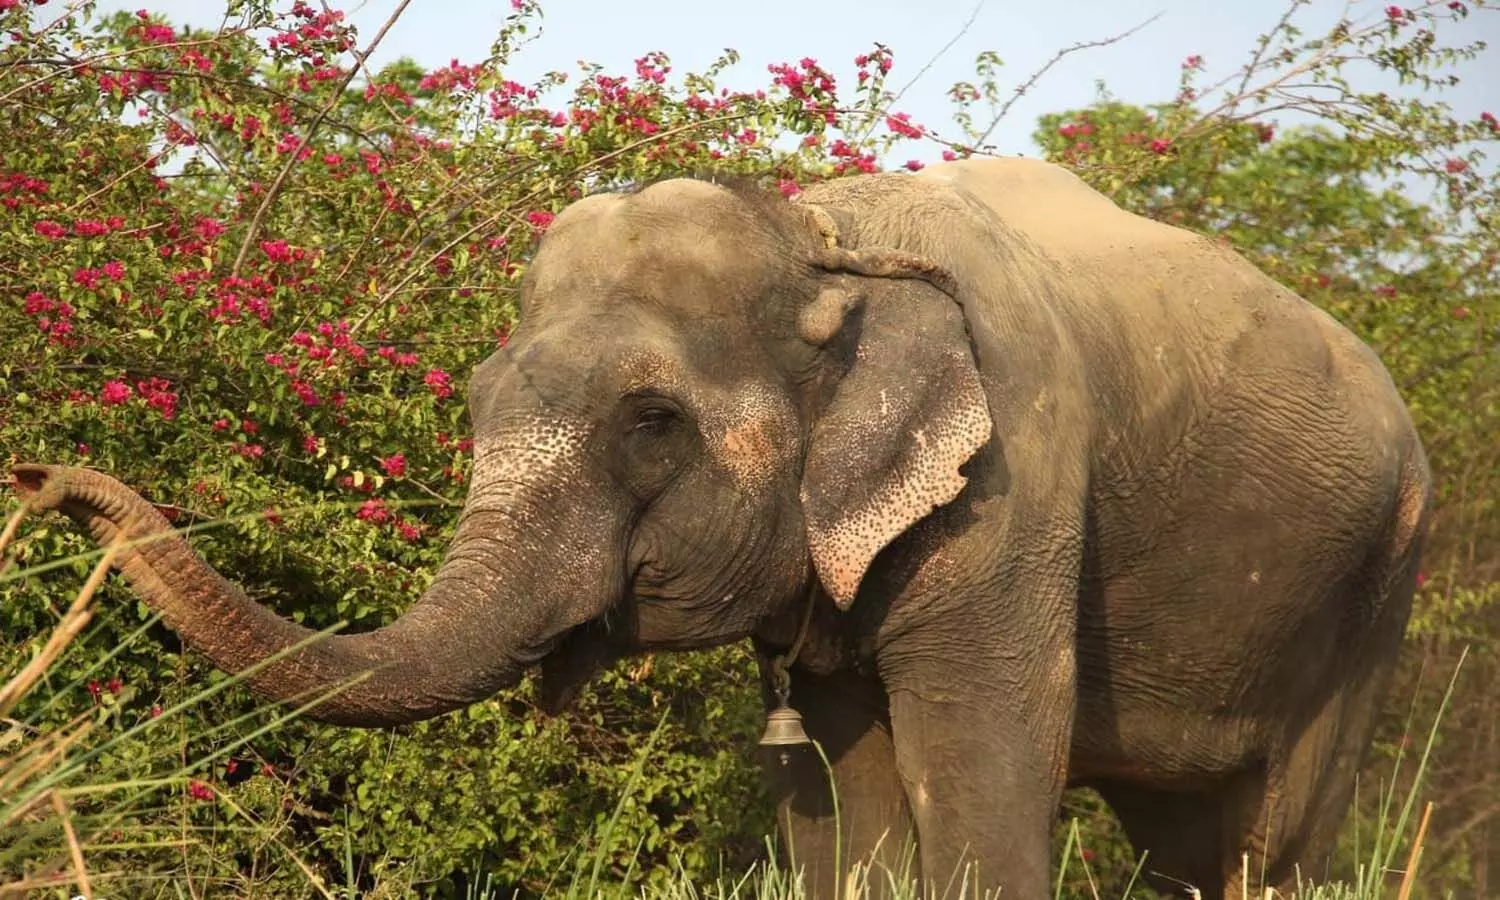 Despite all the obstacles in Bhadohi, the 39-year-old elephant reached the elephant hospital